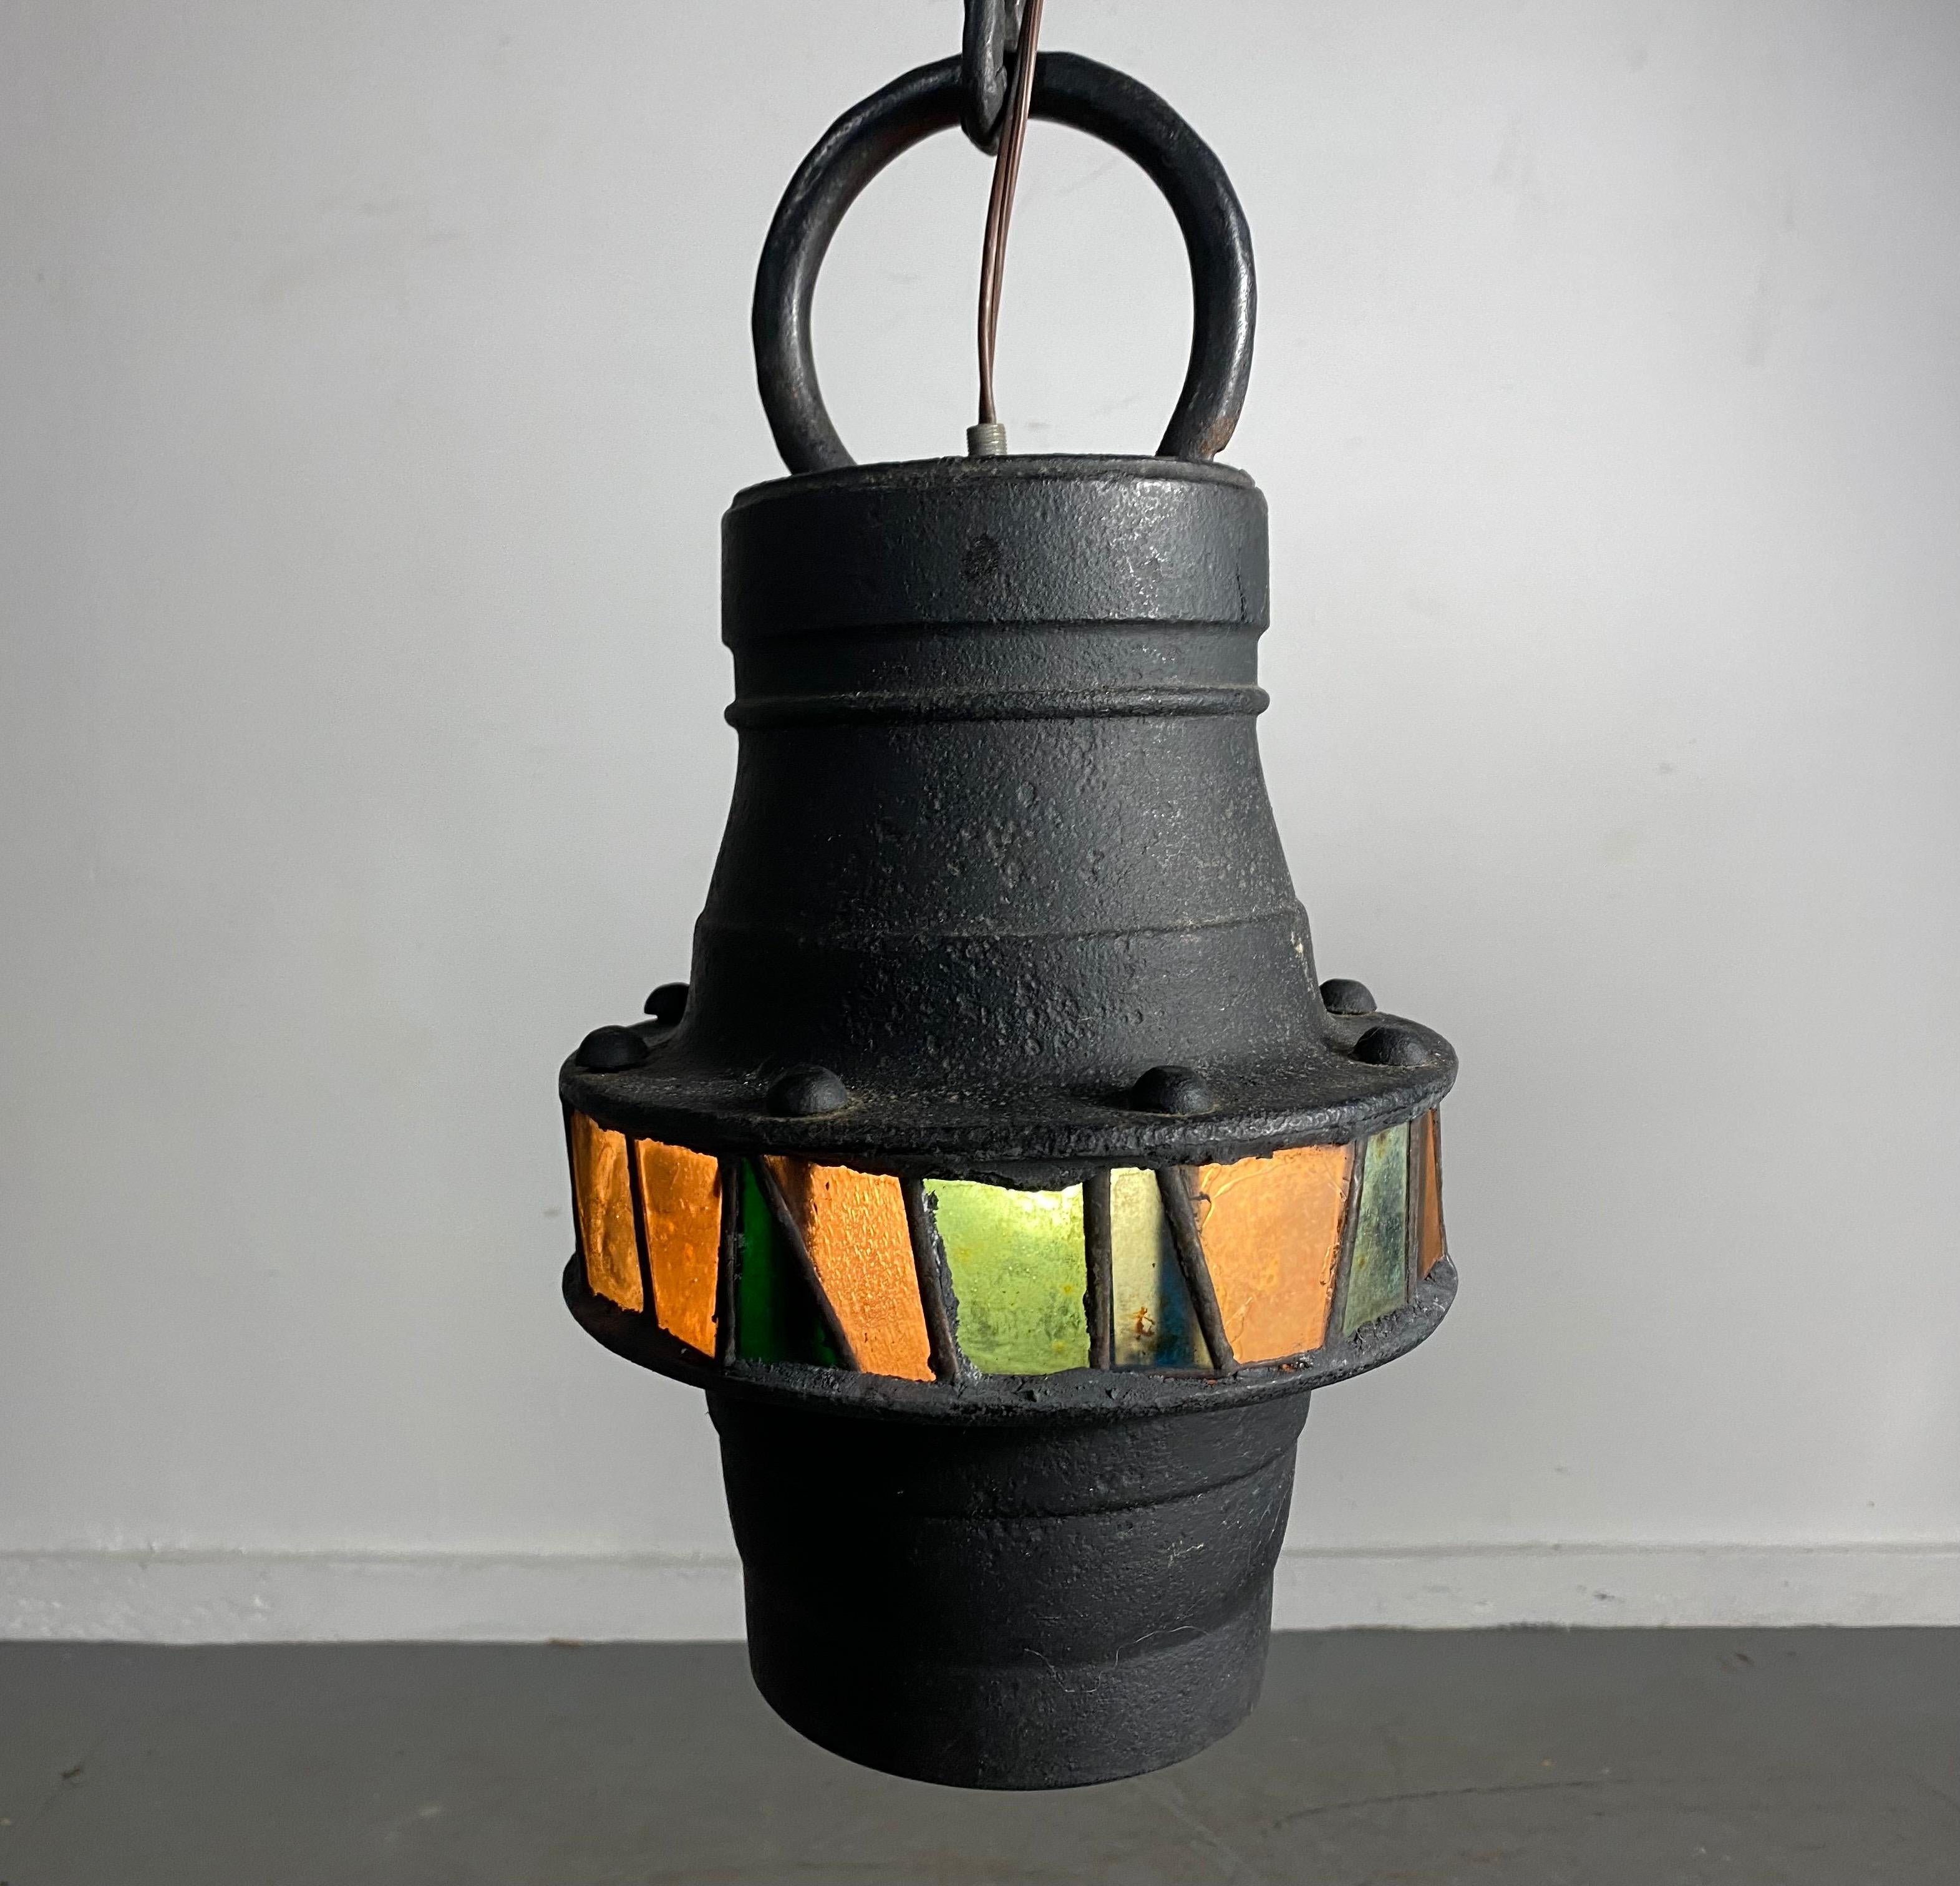 Brutalist Hand-Crafted Iron and stained Glass Hanging Pendant Lamp, c. 1960's For Sale 1